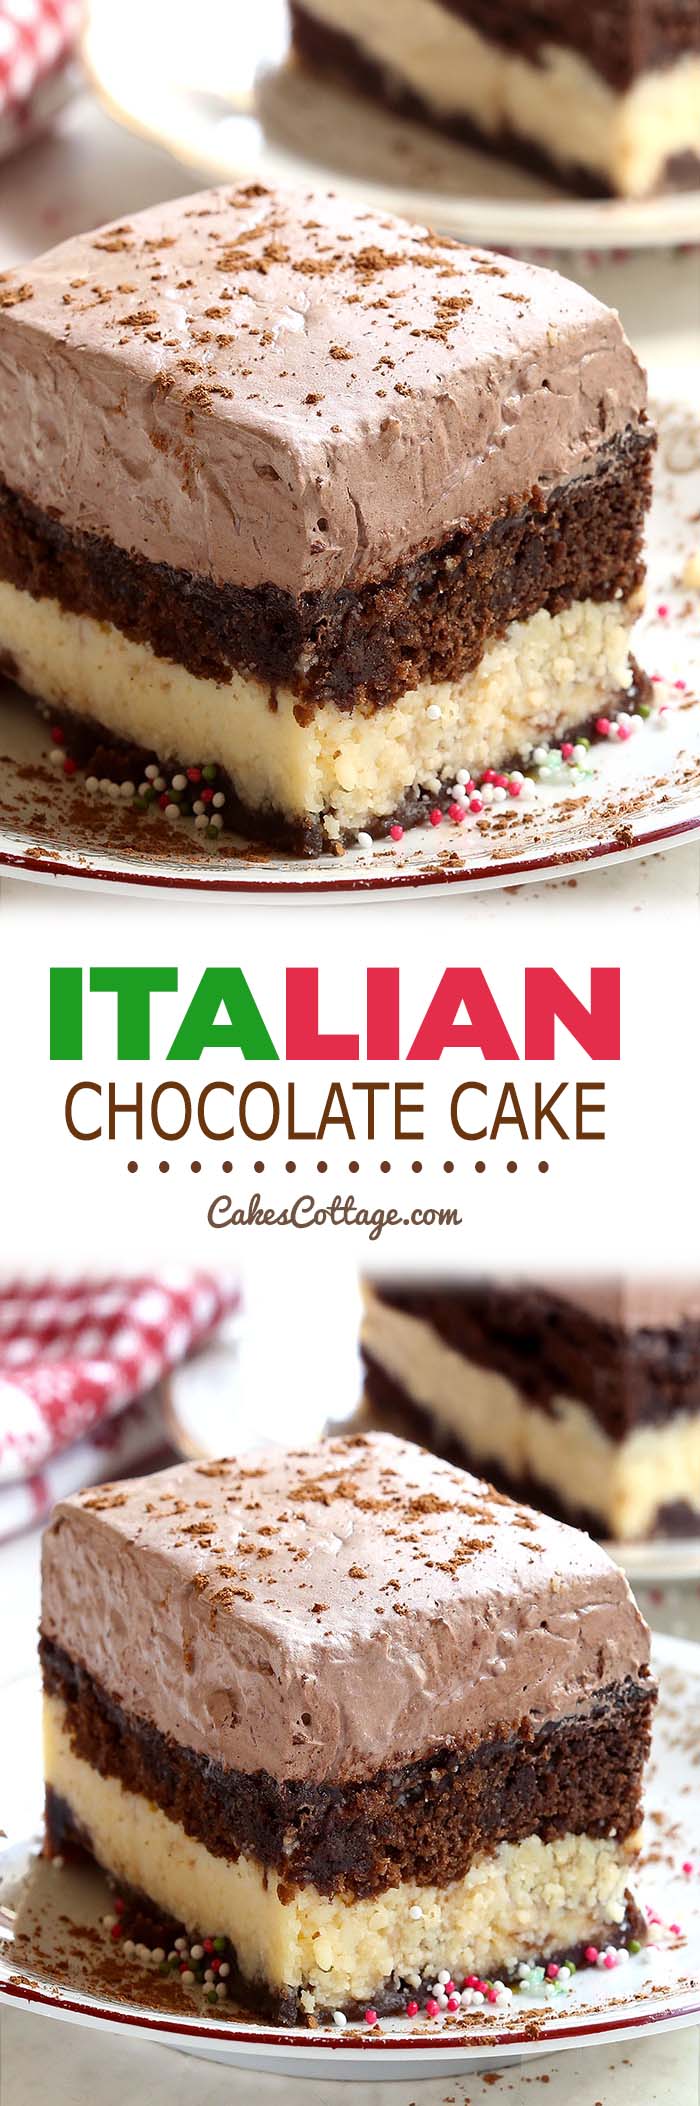 A combination of chocolate marble cake and cheesecake with a creamy chocolate topping, this Italian Chocolate Cake is an absolute must try.